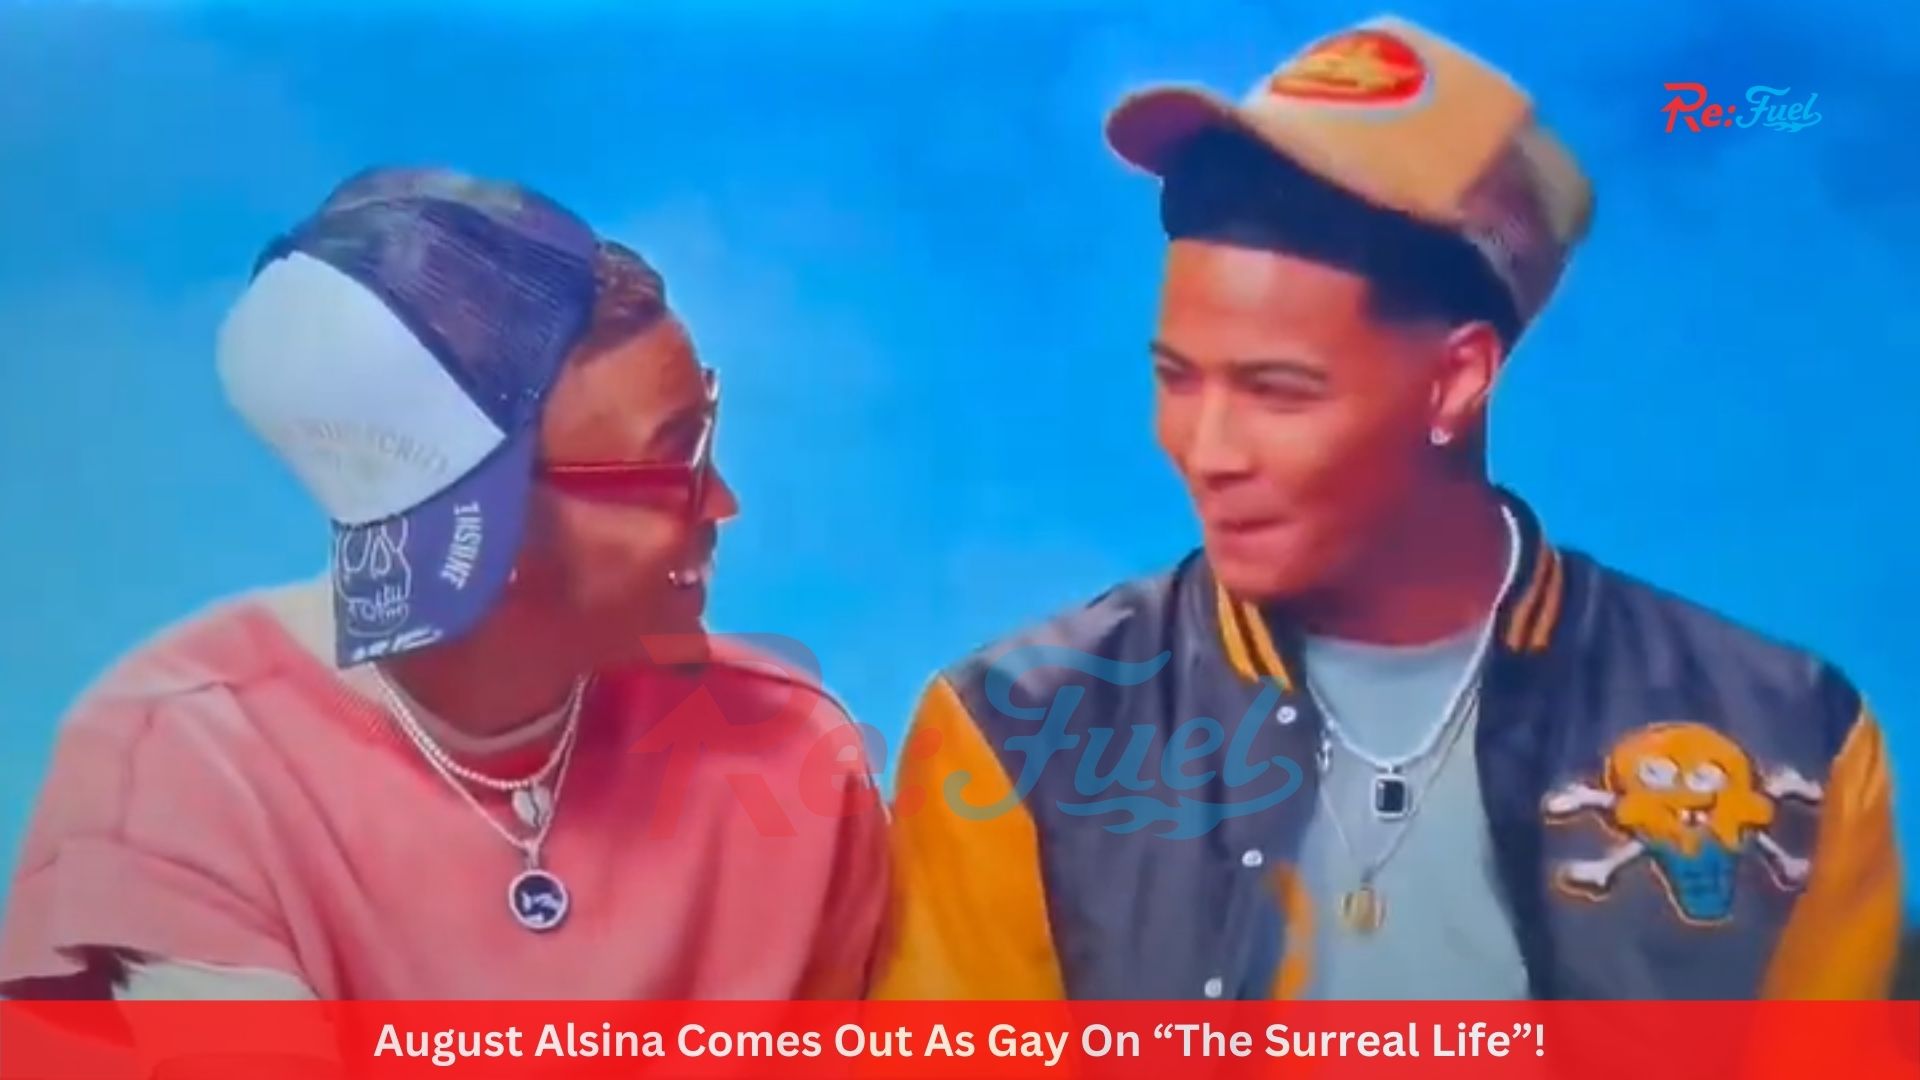 August Alsina Comes Out As Gay On “The Surreal Life”!